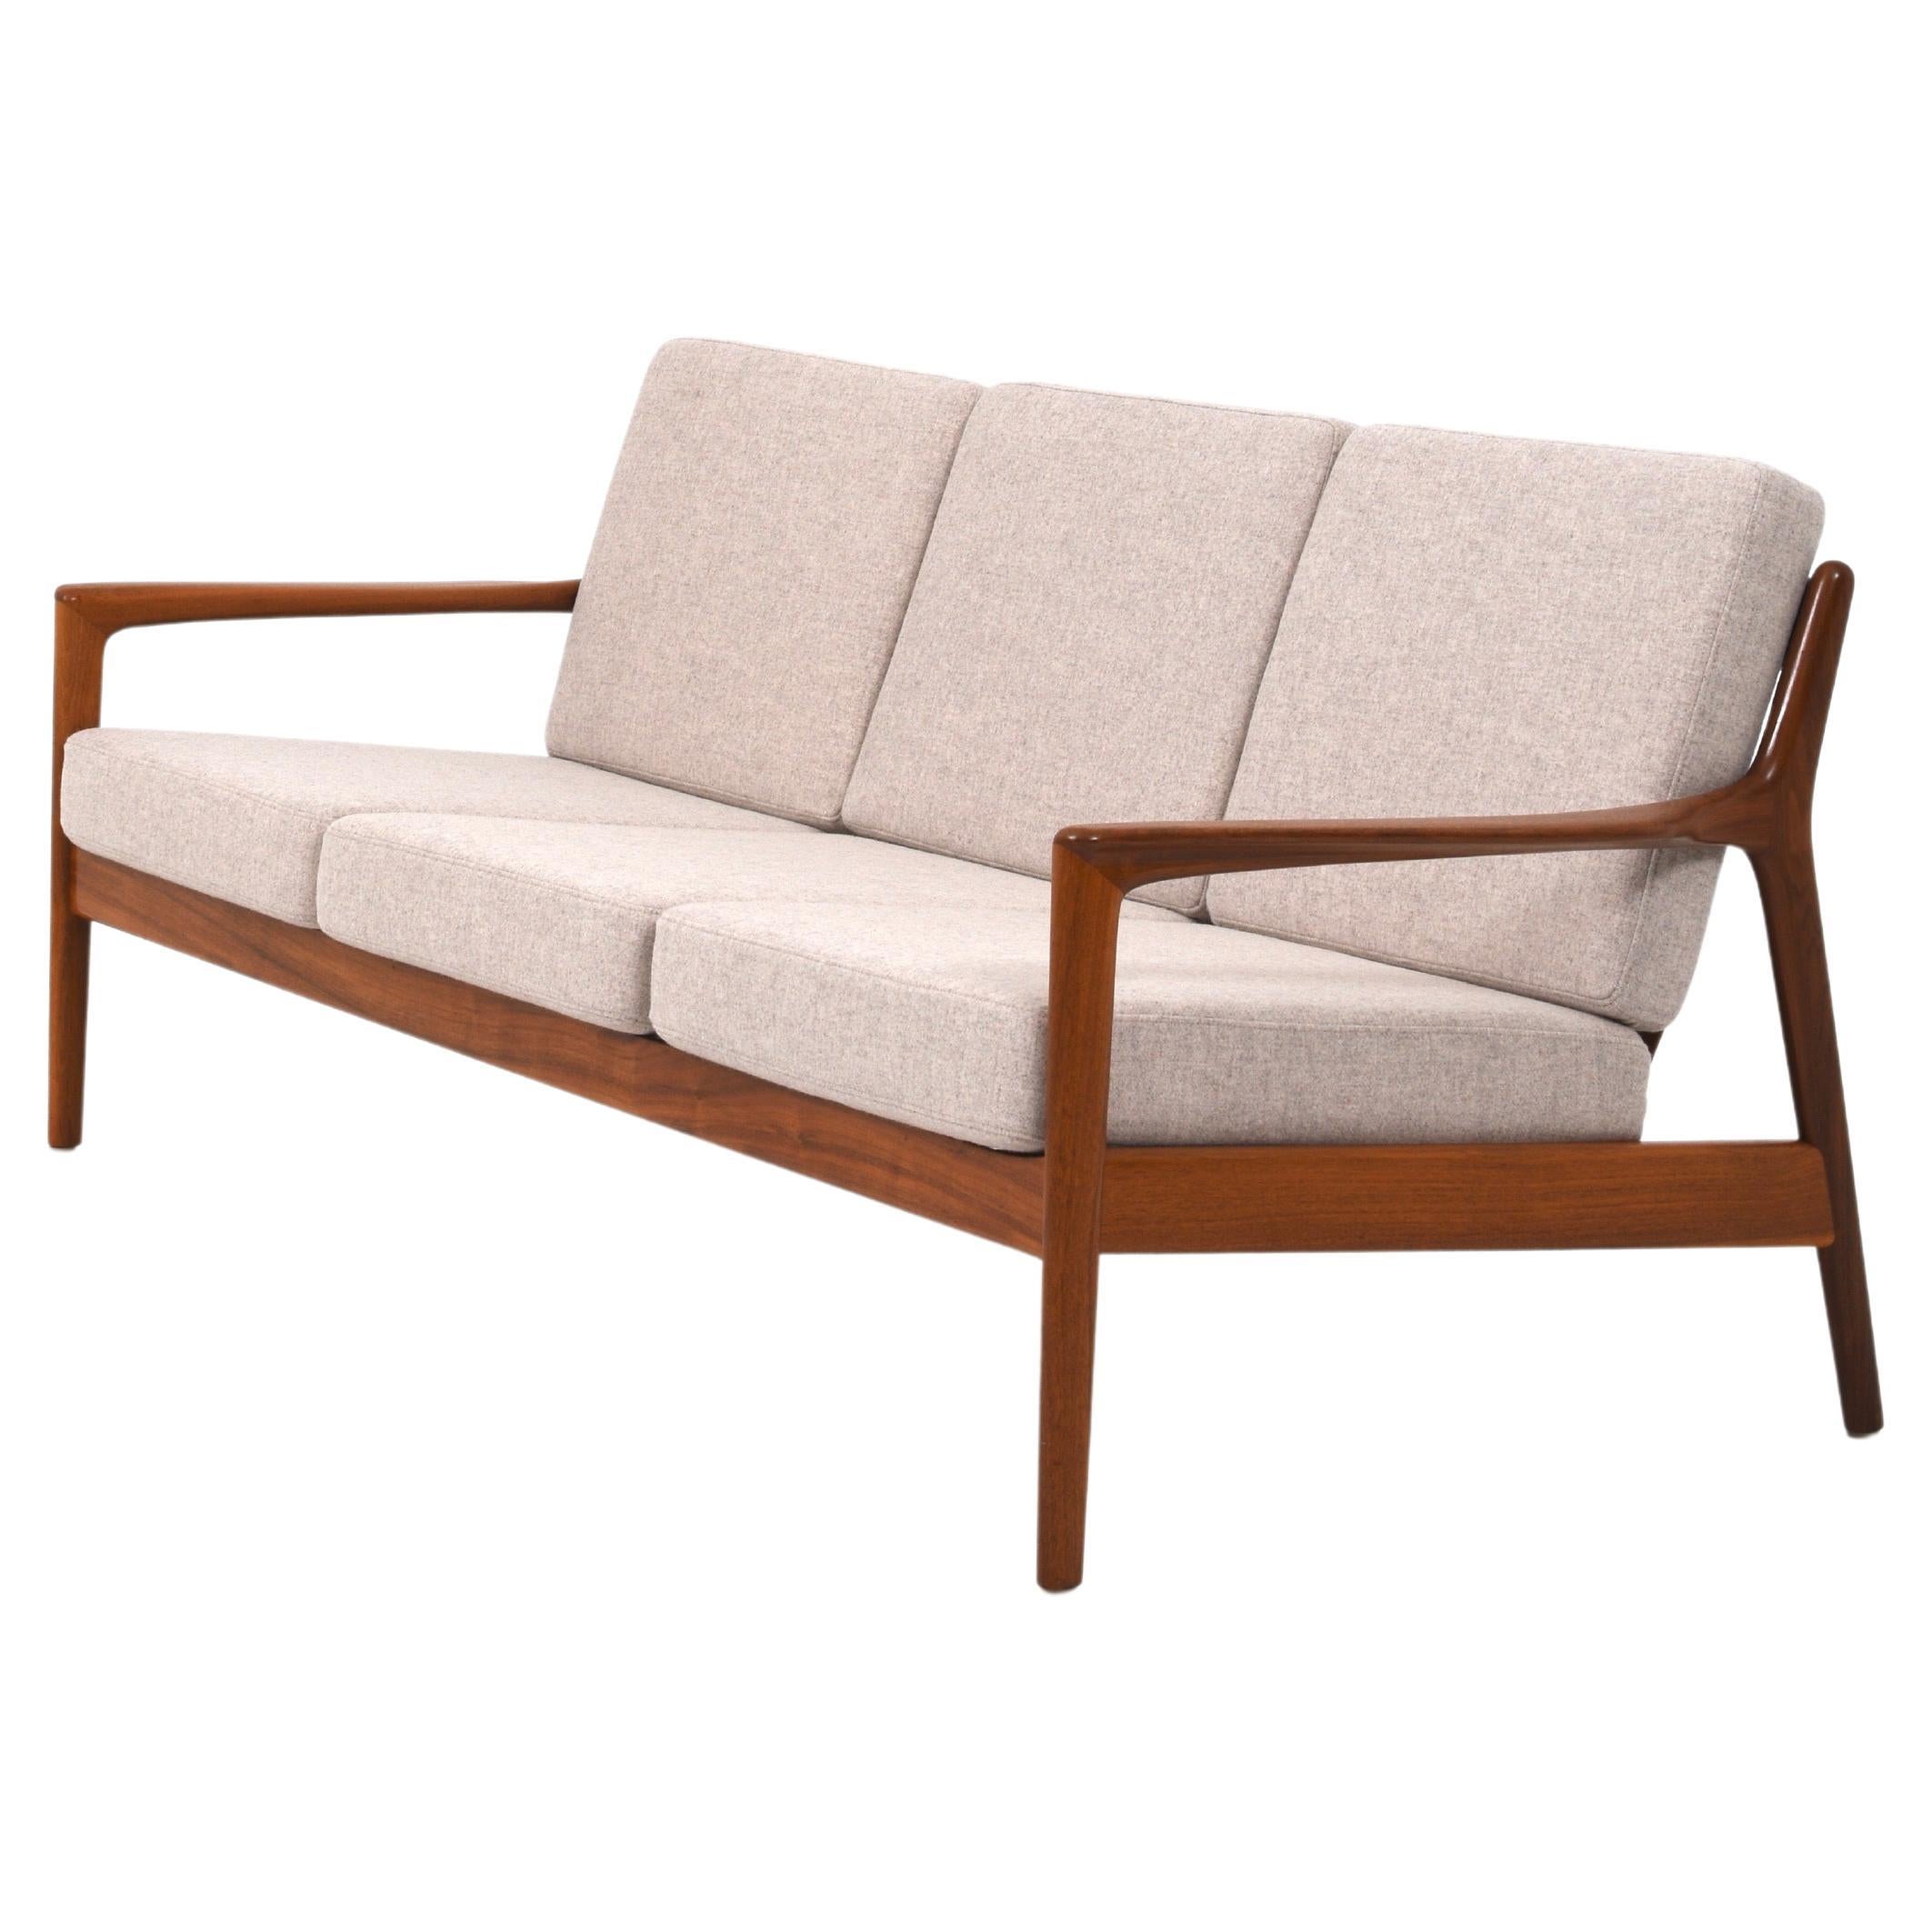 Folke Ohlsson Sofa Model USA-75 Produced by Dux in Sweden For Sale